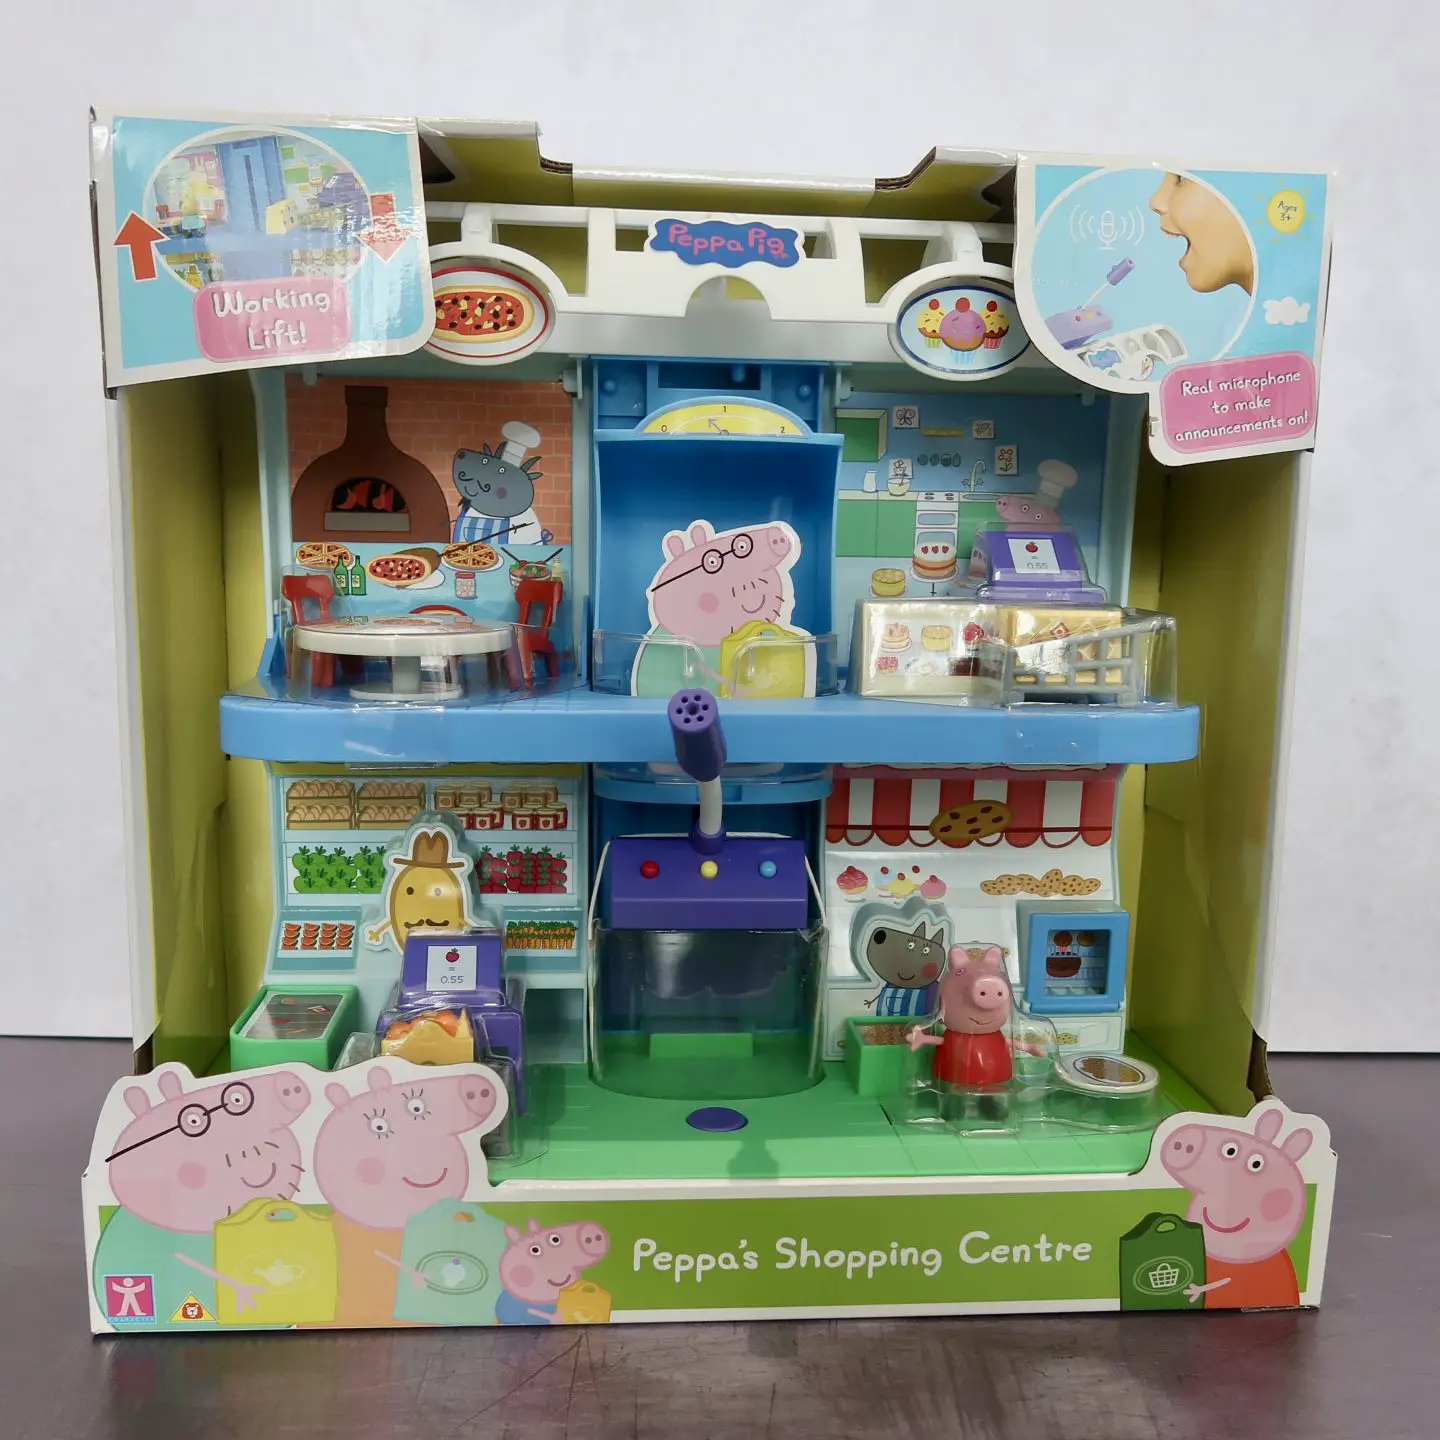 Peppa's Shopping Centre Playset toy